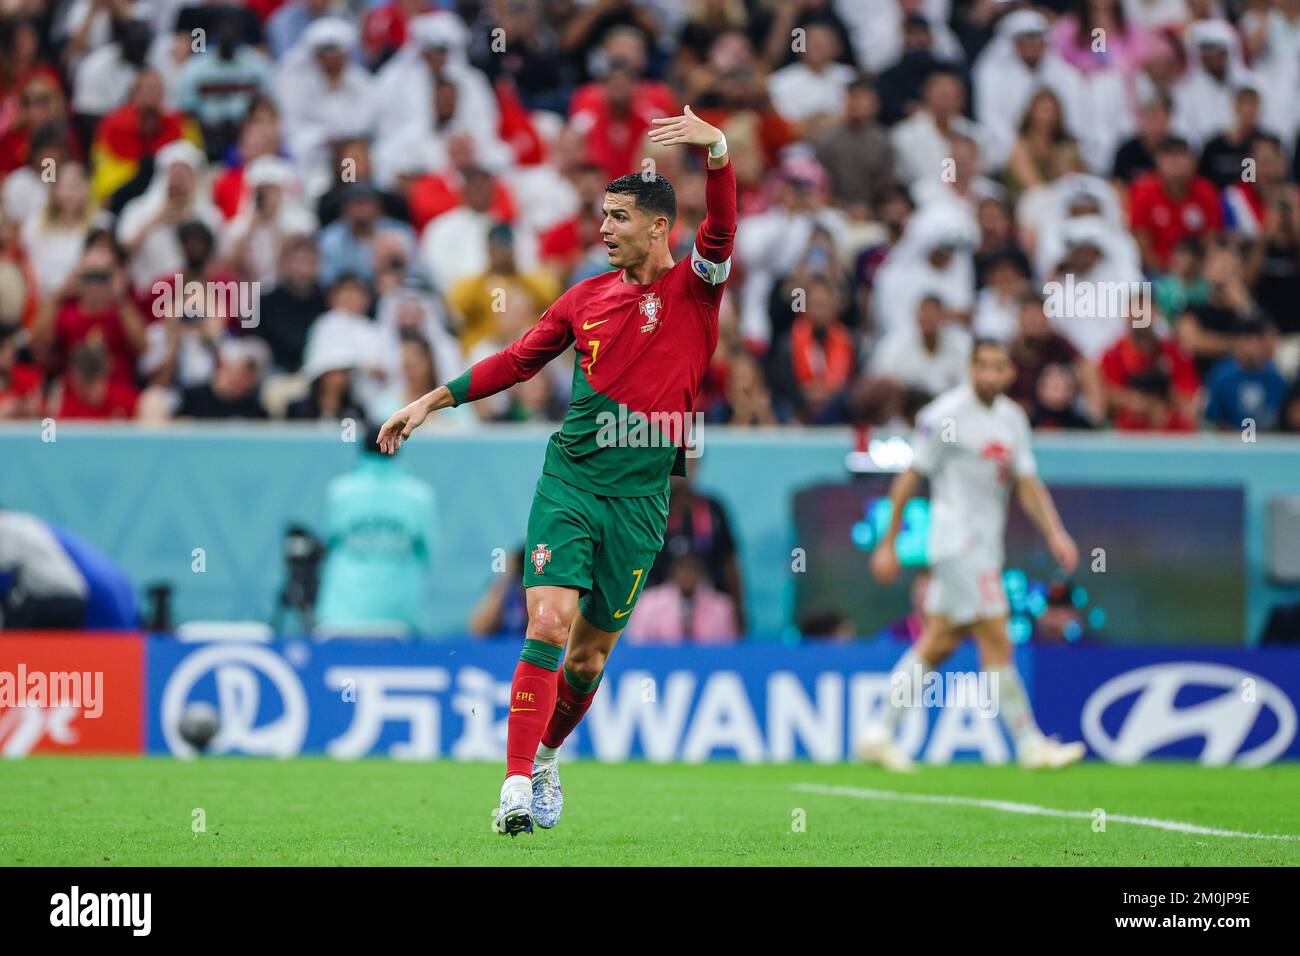 Doha, Qatar. 06th Dec, 2022. Cristiano Ronaldo player of Portugal during a match against Switzerland valid for the round of 16 of the FIFA World Cup at Lusail Stadium, in Doha, Qatar. December 06, 2022 Credit: Brazil Photo Press/Alamy Live News Stock Photo